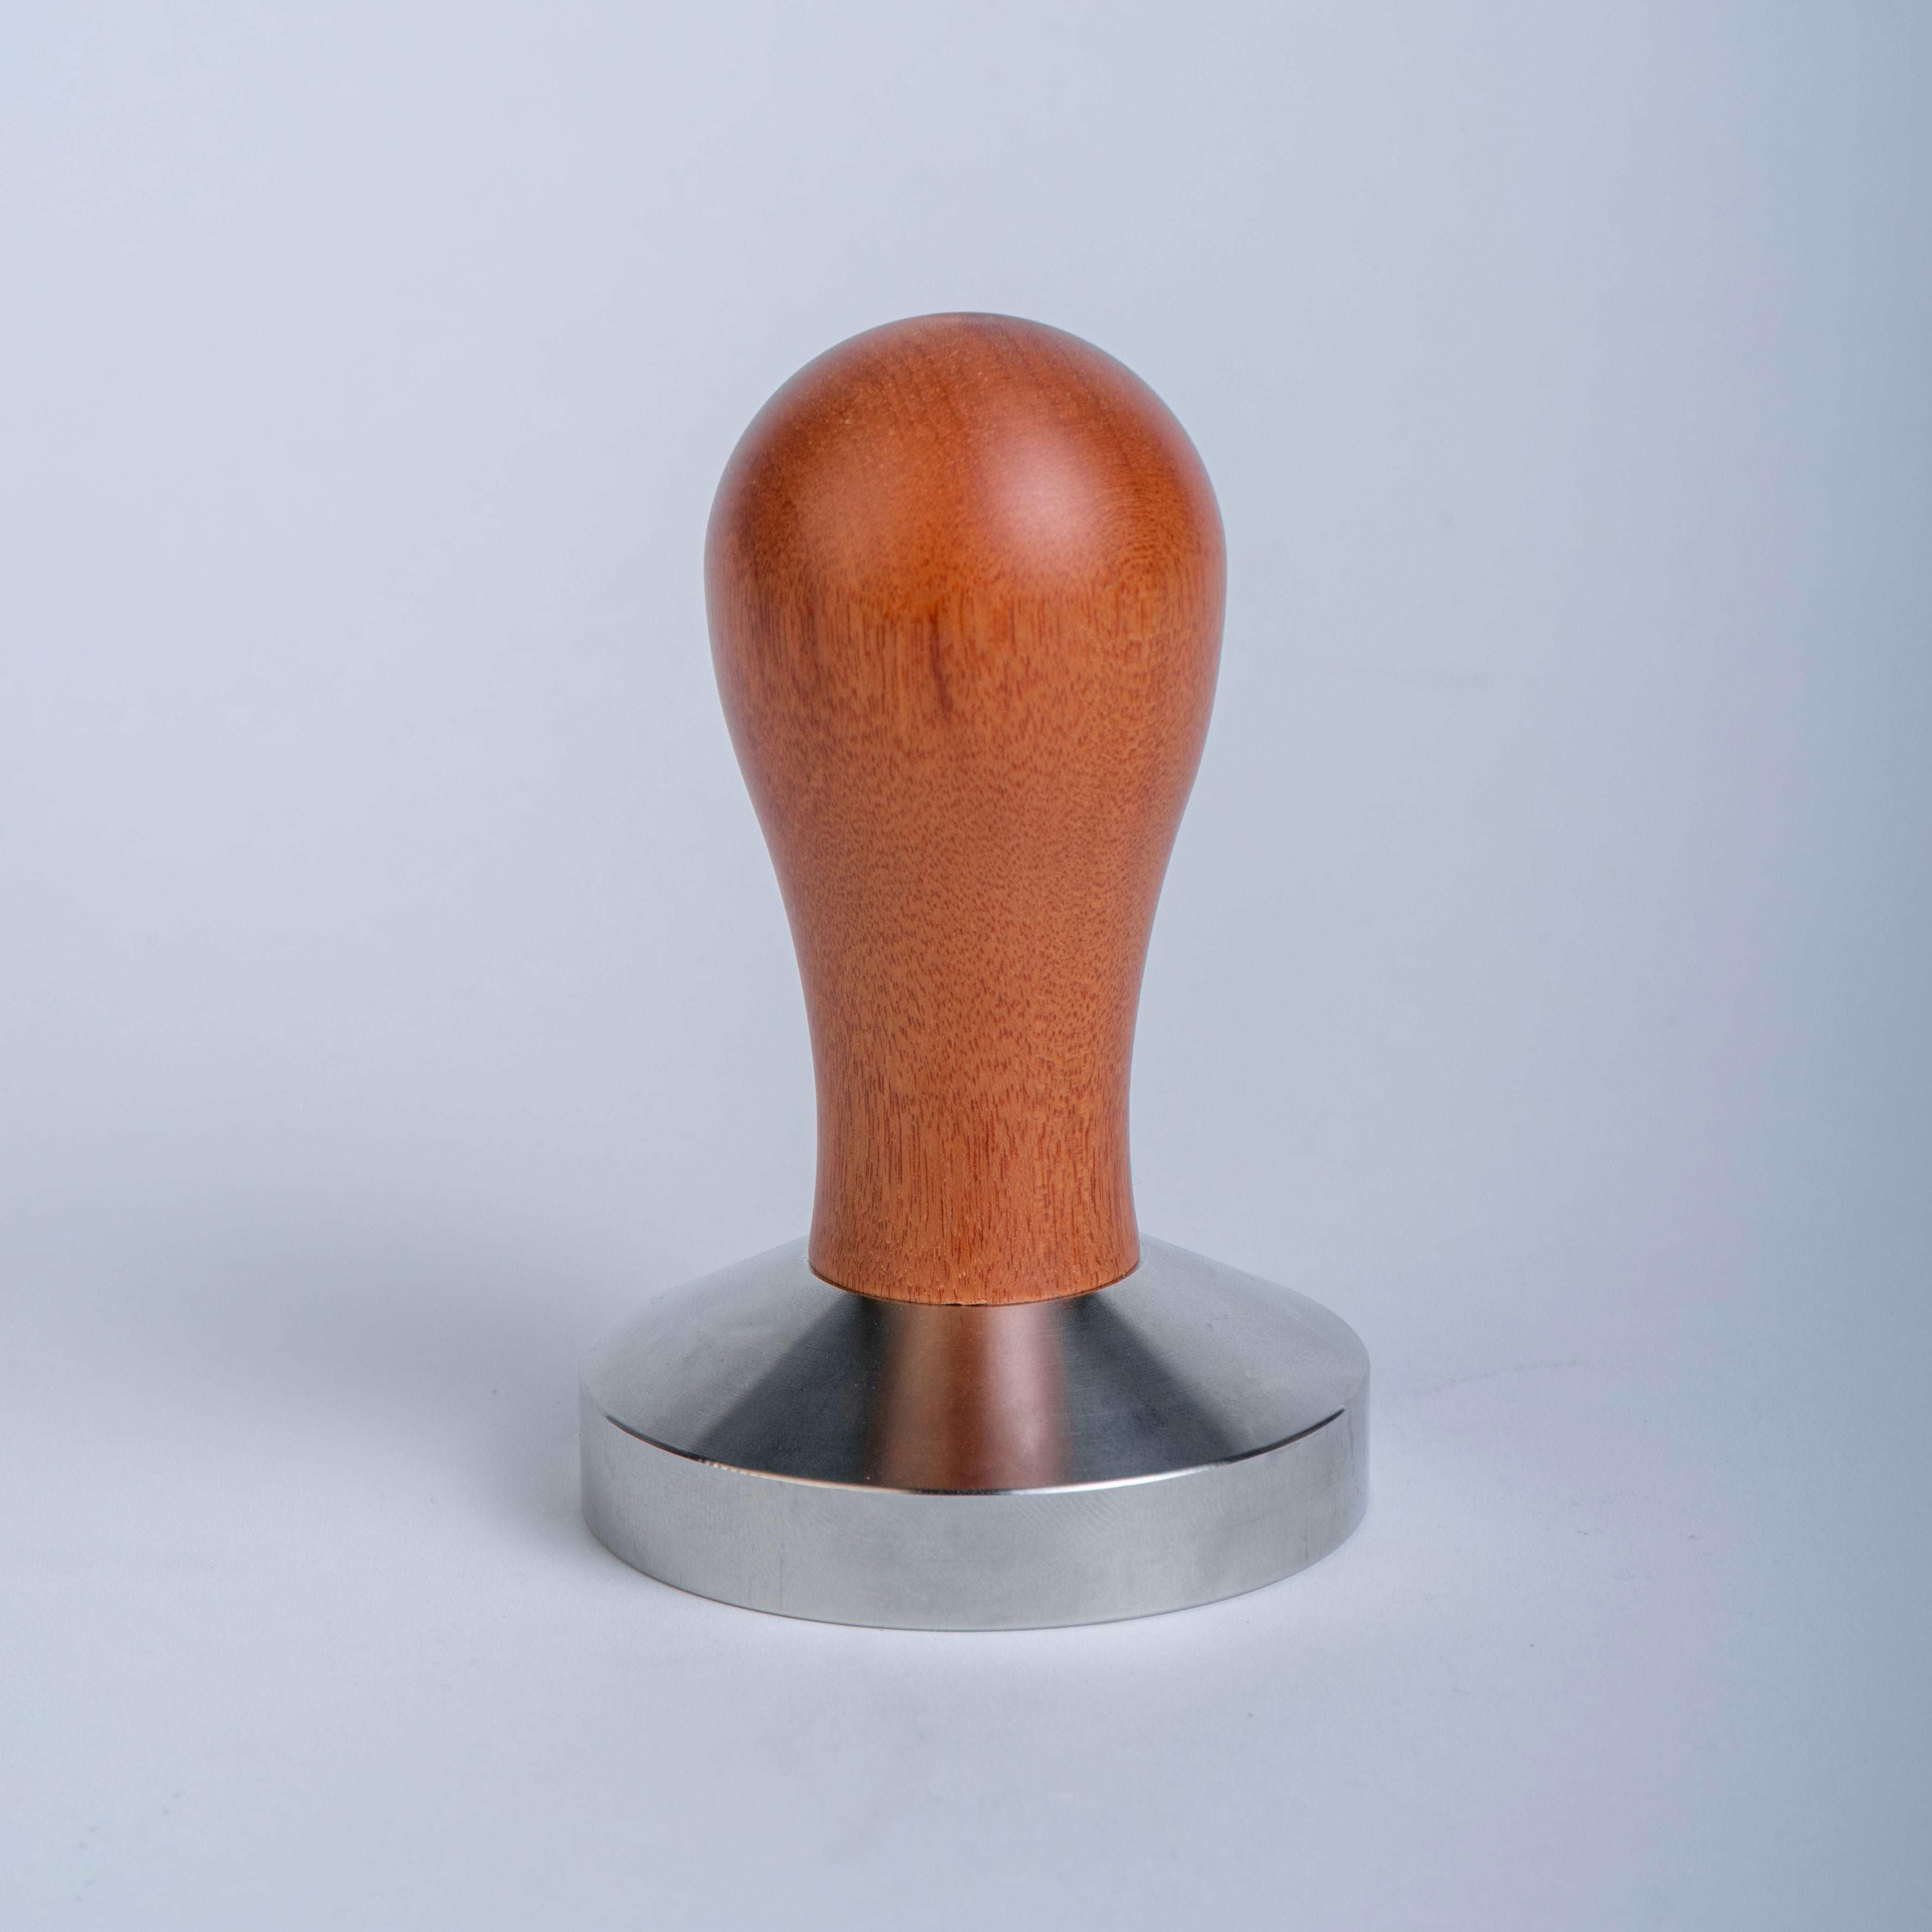  YOLOYO 58mm Espresso Tamper, Walnut Wooden Handle Coffee Tamper  for Espresso Machine 58mm, 30lb Consistant Pressure Calibrated Spring  Loaded Tamper with Premium Stainless Steel Base & Tamper Mat: Home & Kitchen